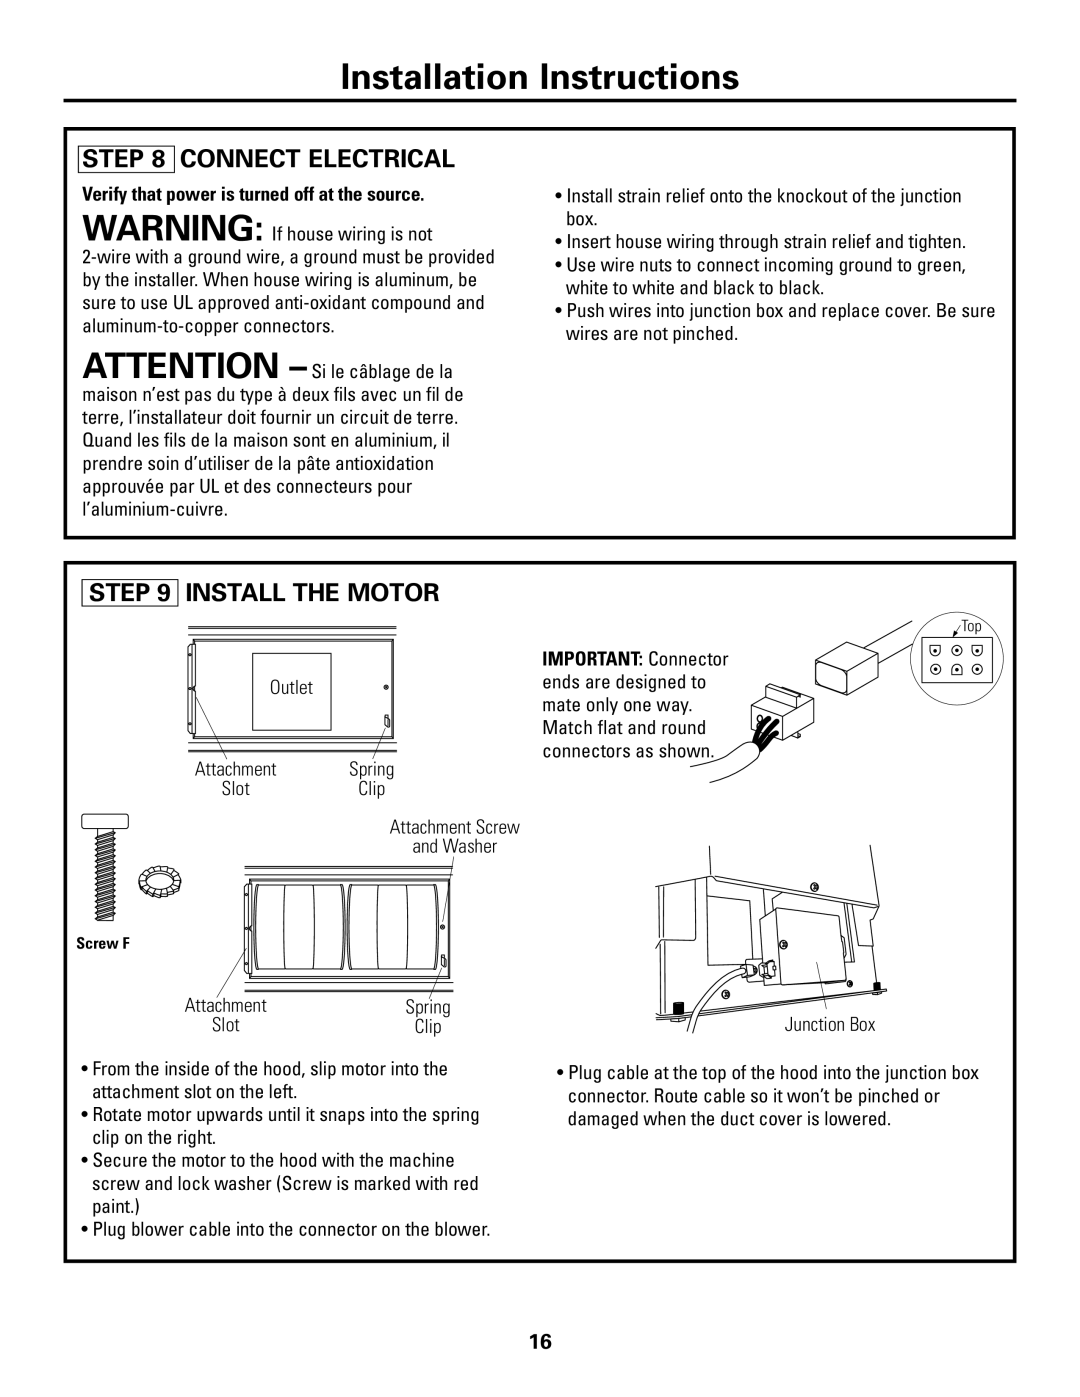 GE ZV541 Connect Electrical, Install The Motor, Verify that power is turned off at the source, Installation Instructions 